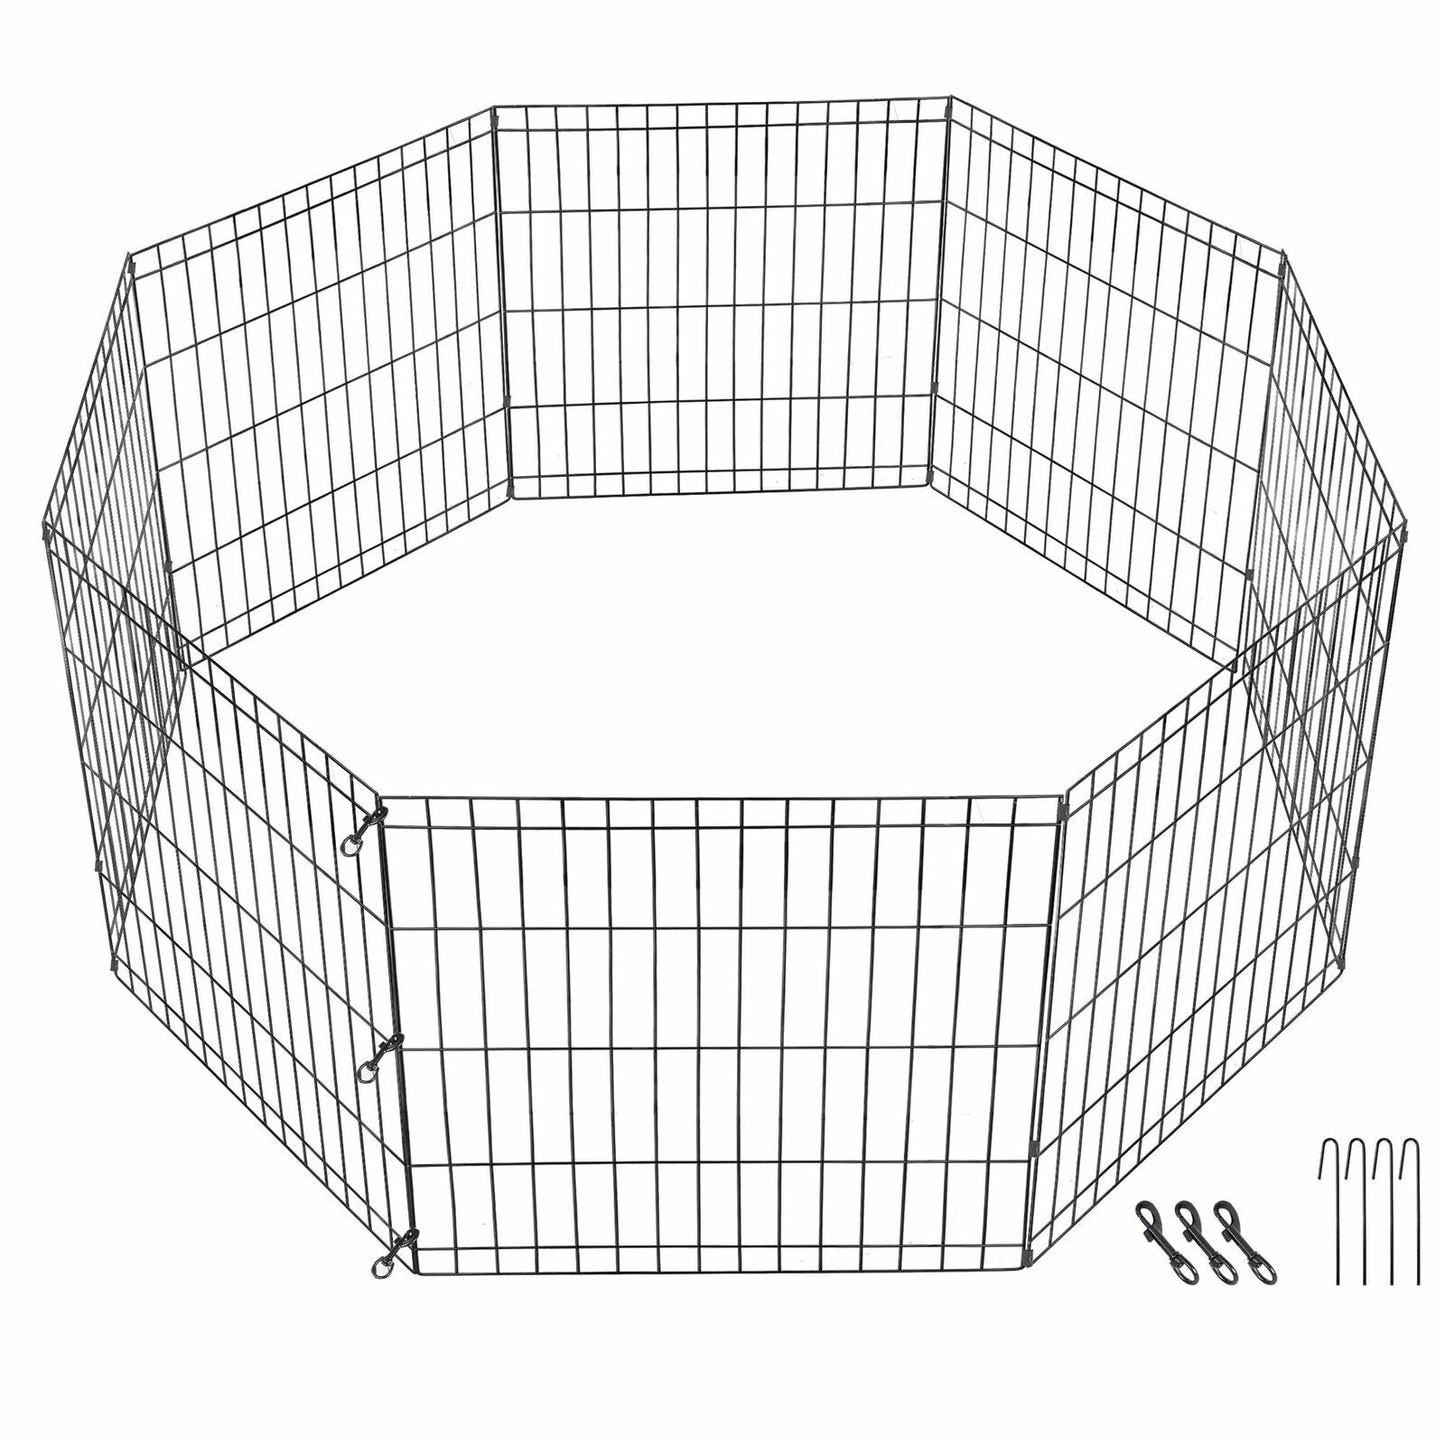 24 Inch 8 Panels Dog Playpen Tall Large Crate Fence Pet Play Pen Exercise Cage